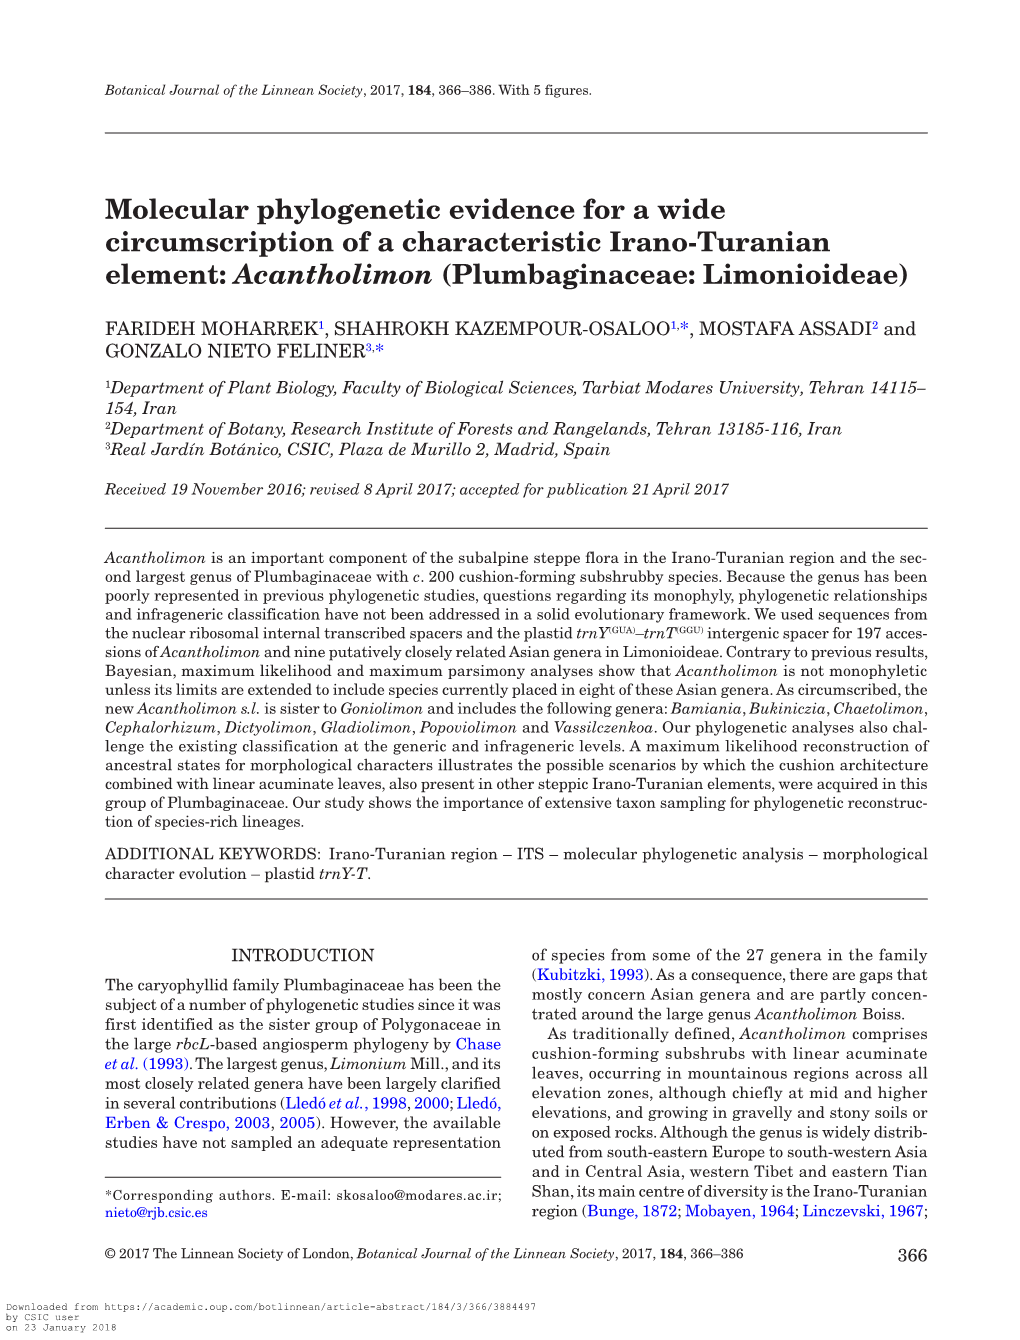 Nieto Molecular Phylogenetic Evidence for a Wide.Pdf